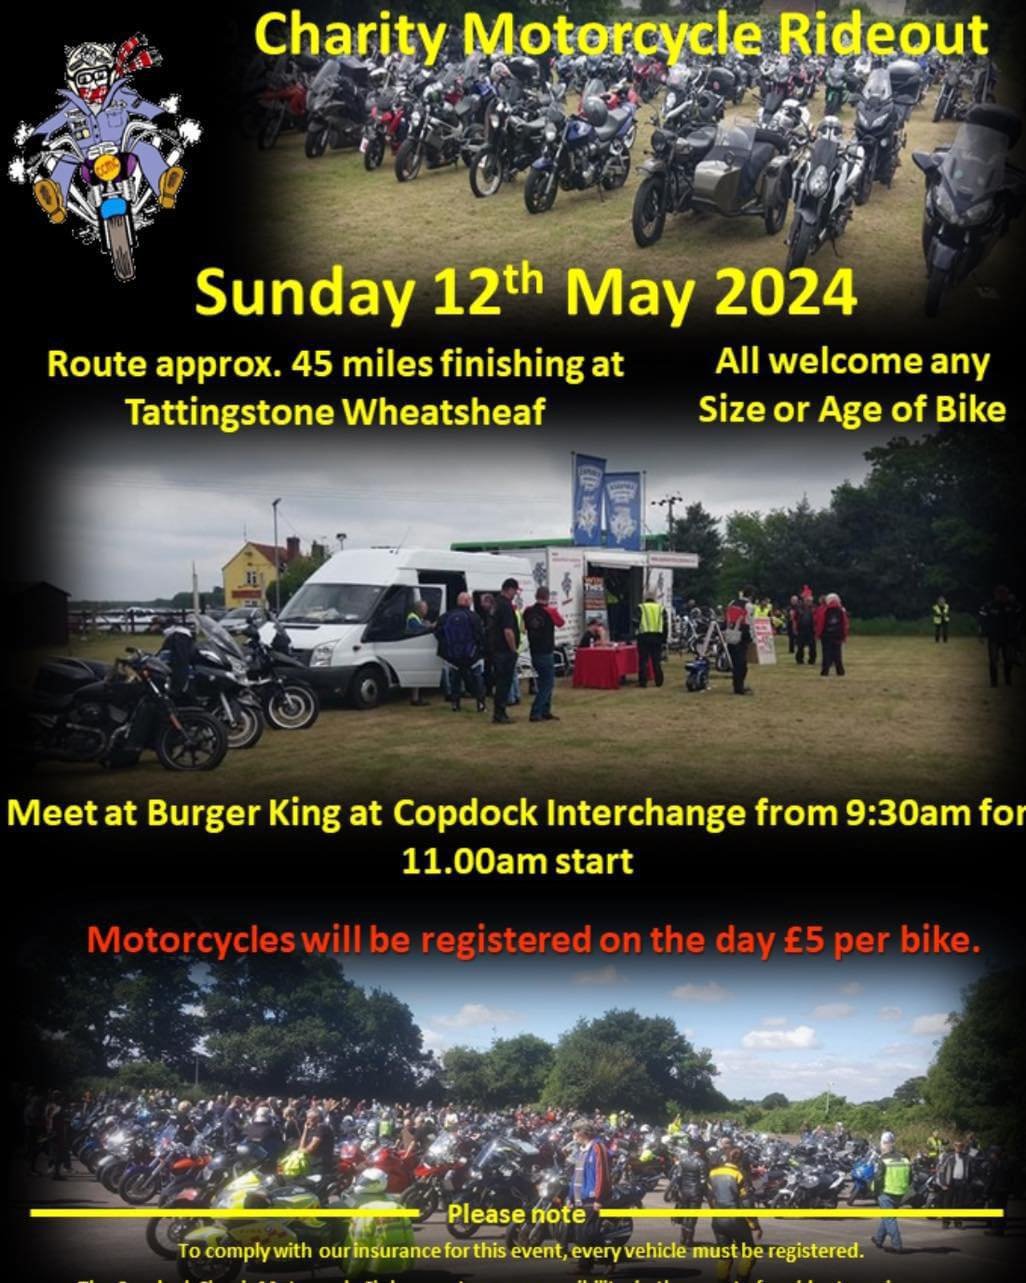 📢 CALLING ALL BIKERS 📢

Join us today for our first charity rideout of 2024. Just &pound;5 to participate with all proceeds going to Pancreatic Cancer UK. 

📍 Burger King, Copdock
⏱️ Registration 0930-1045
🏍️ Departure 1100
🏁 Wheatsheaf for BBQ,